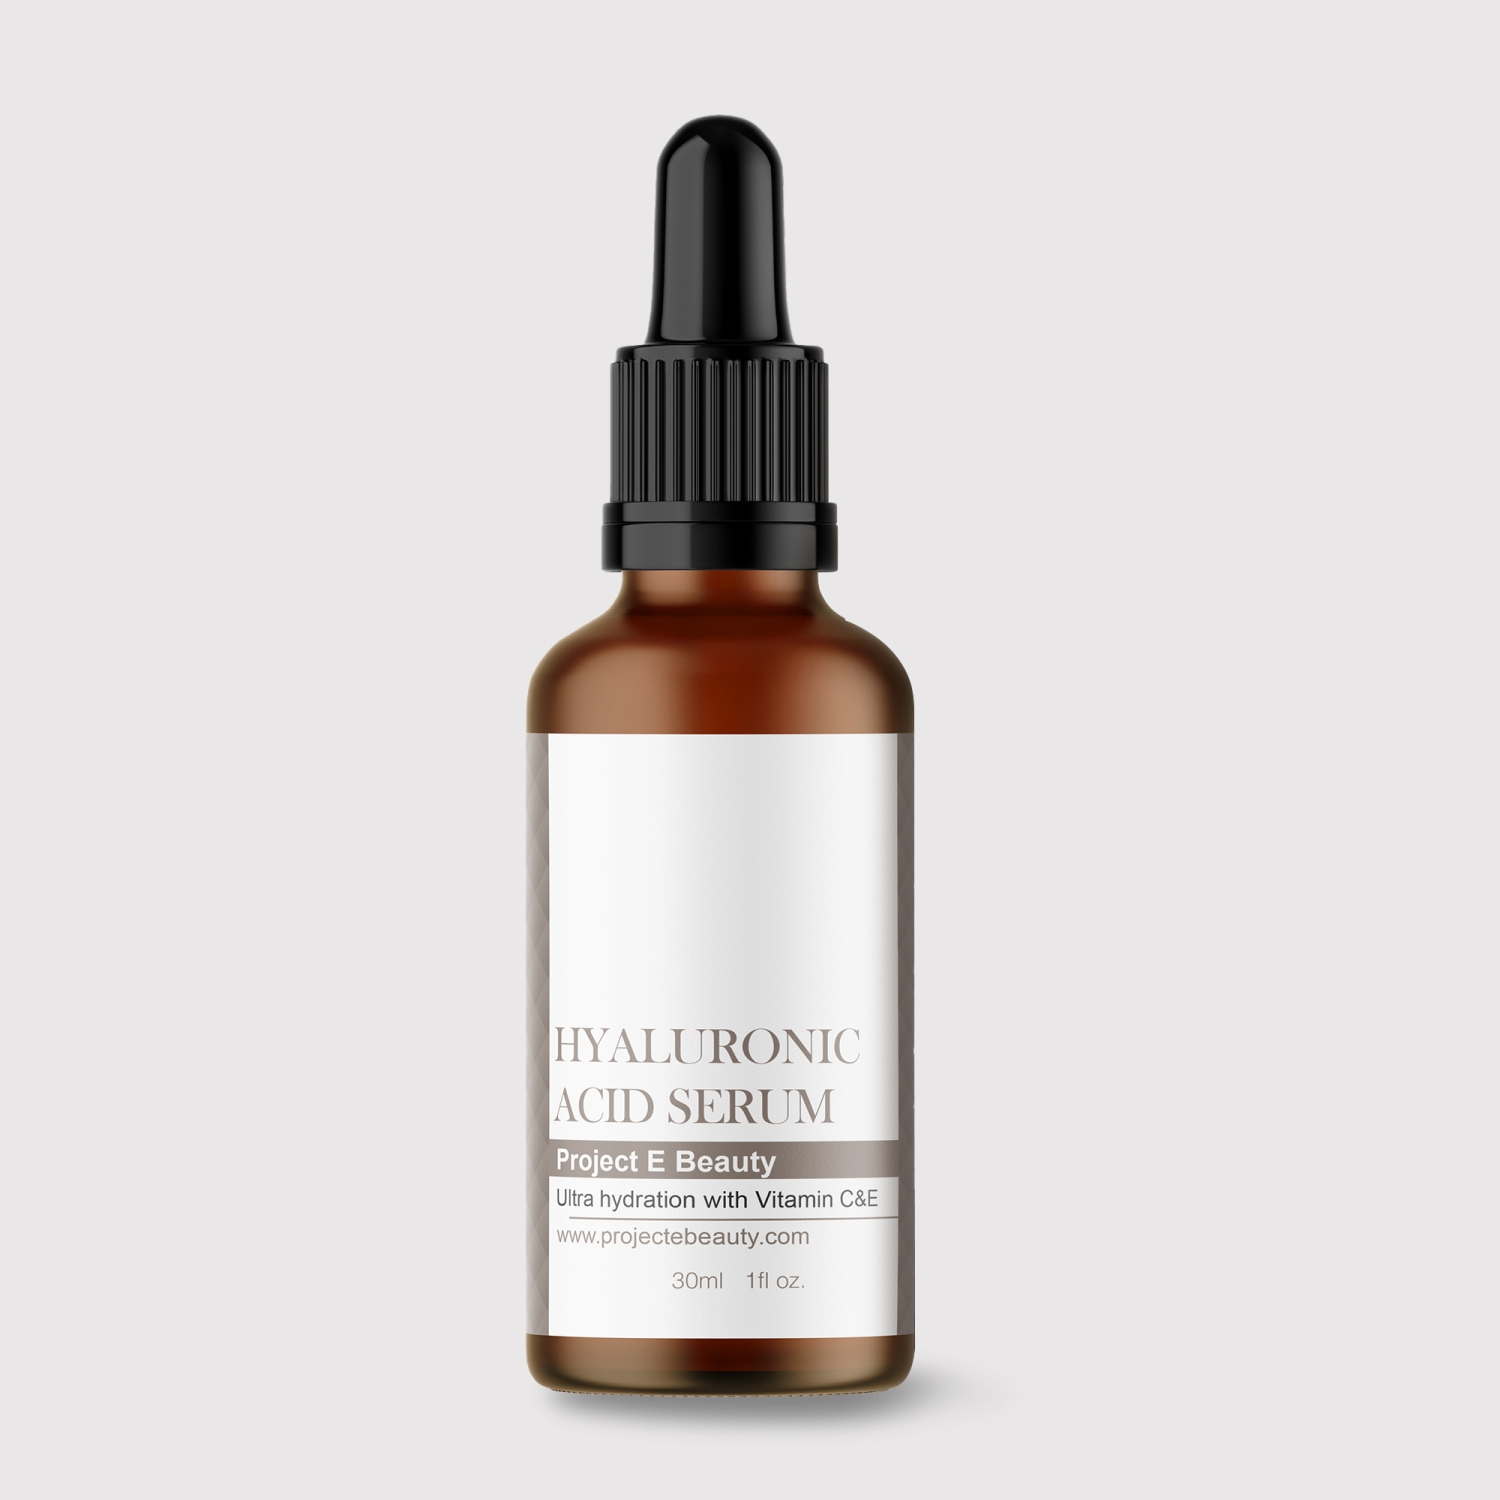 Project E Beauty Hyaluronic Acid Serum Anti-Aging with Vitamin C & E, for Unisex, Hydration for the Eyes & Face, 30ml